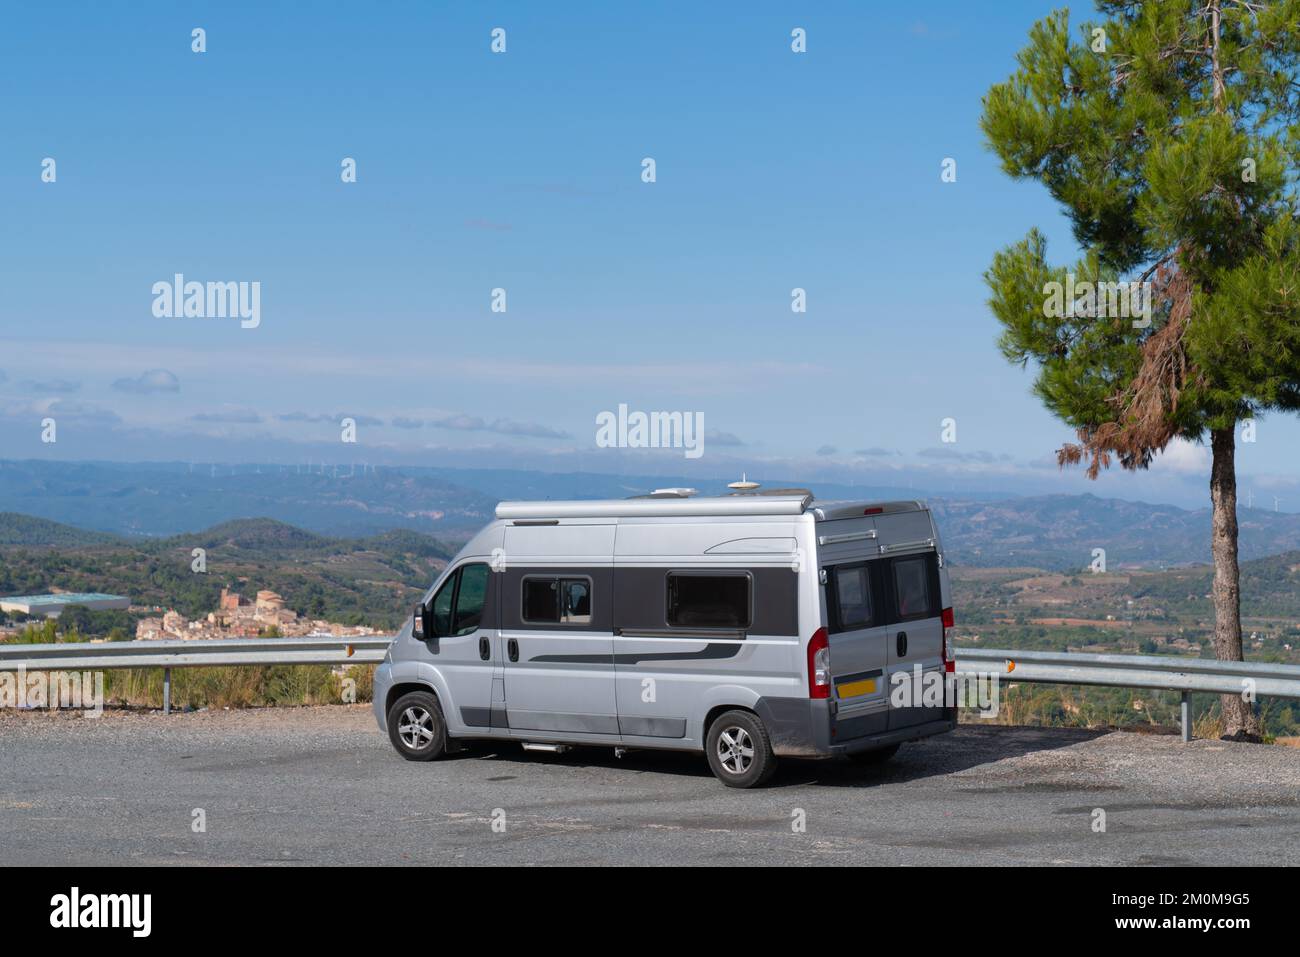 Motorhome campervan view of Spanish countryside and Falset village Priorat region Catalonia Spain famous for its wine Stock Photo